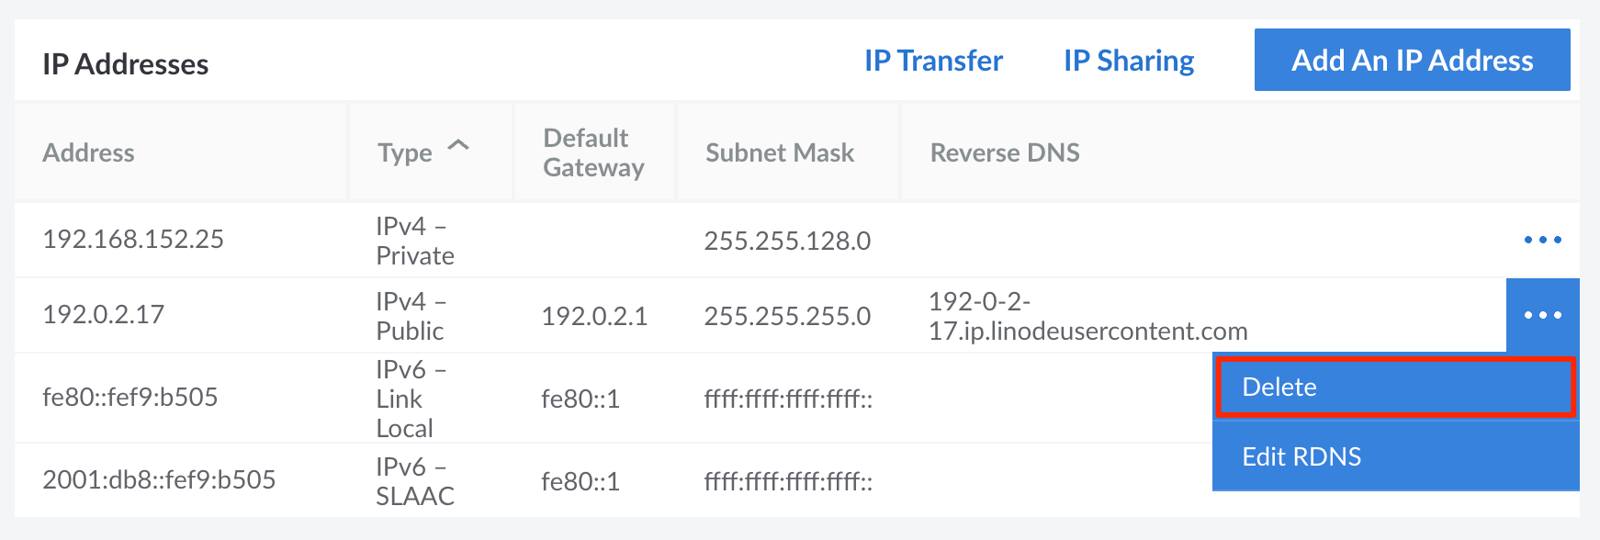 Select &lsquo;Delete&rsquo; option from the IP address menu.